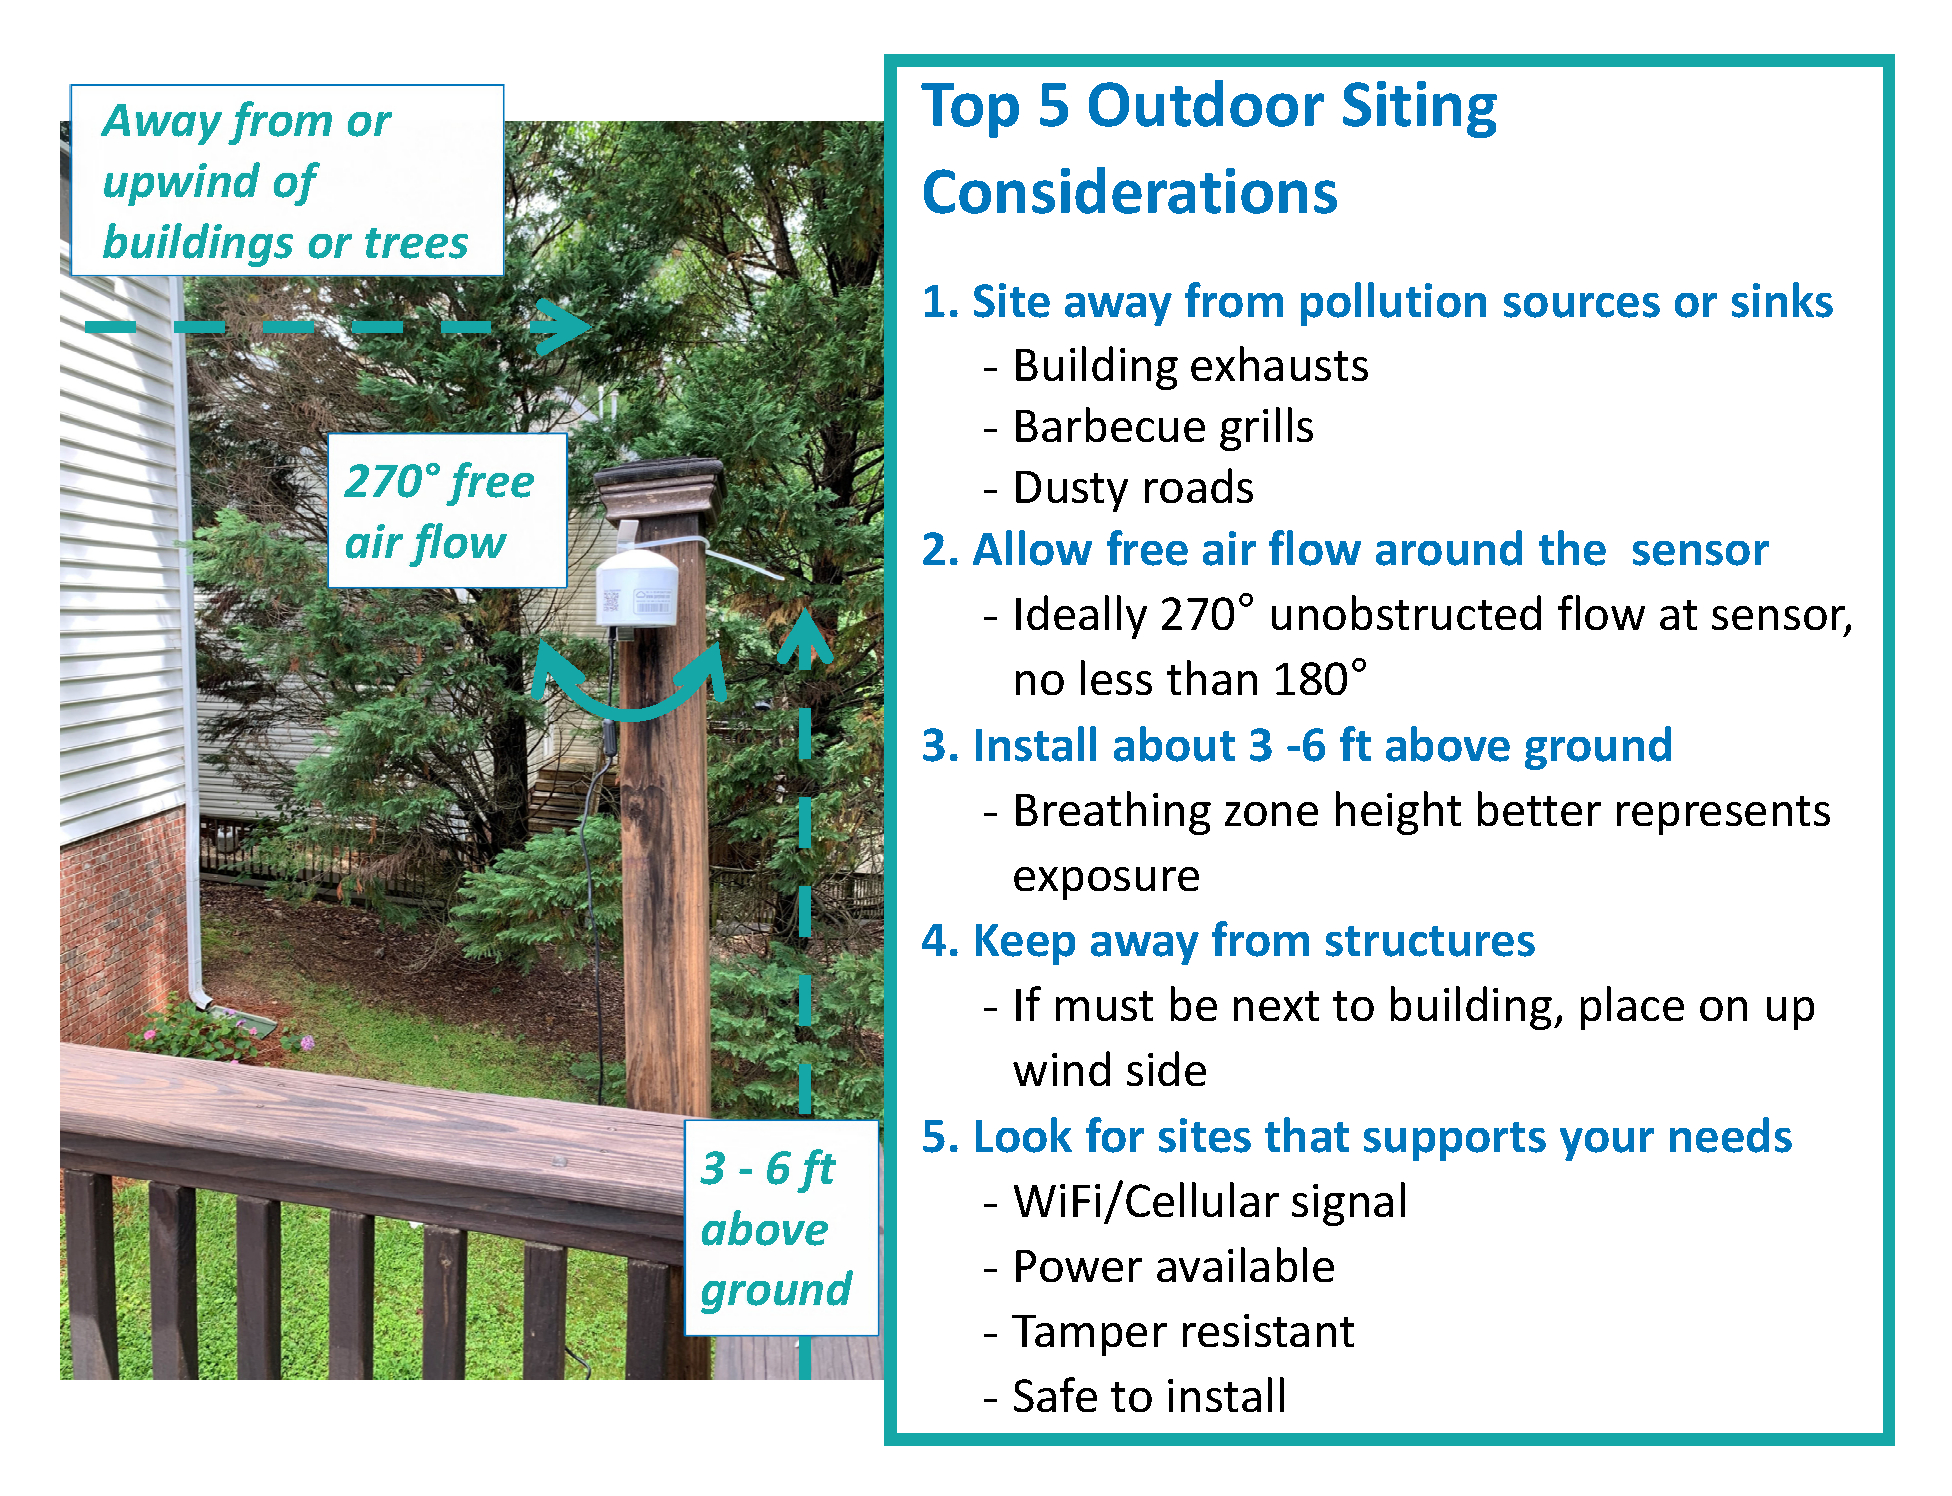 Top five outdoor siting considerations infographic.